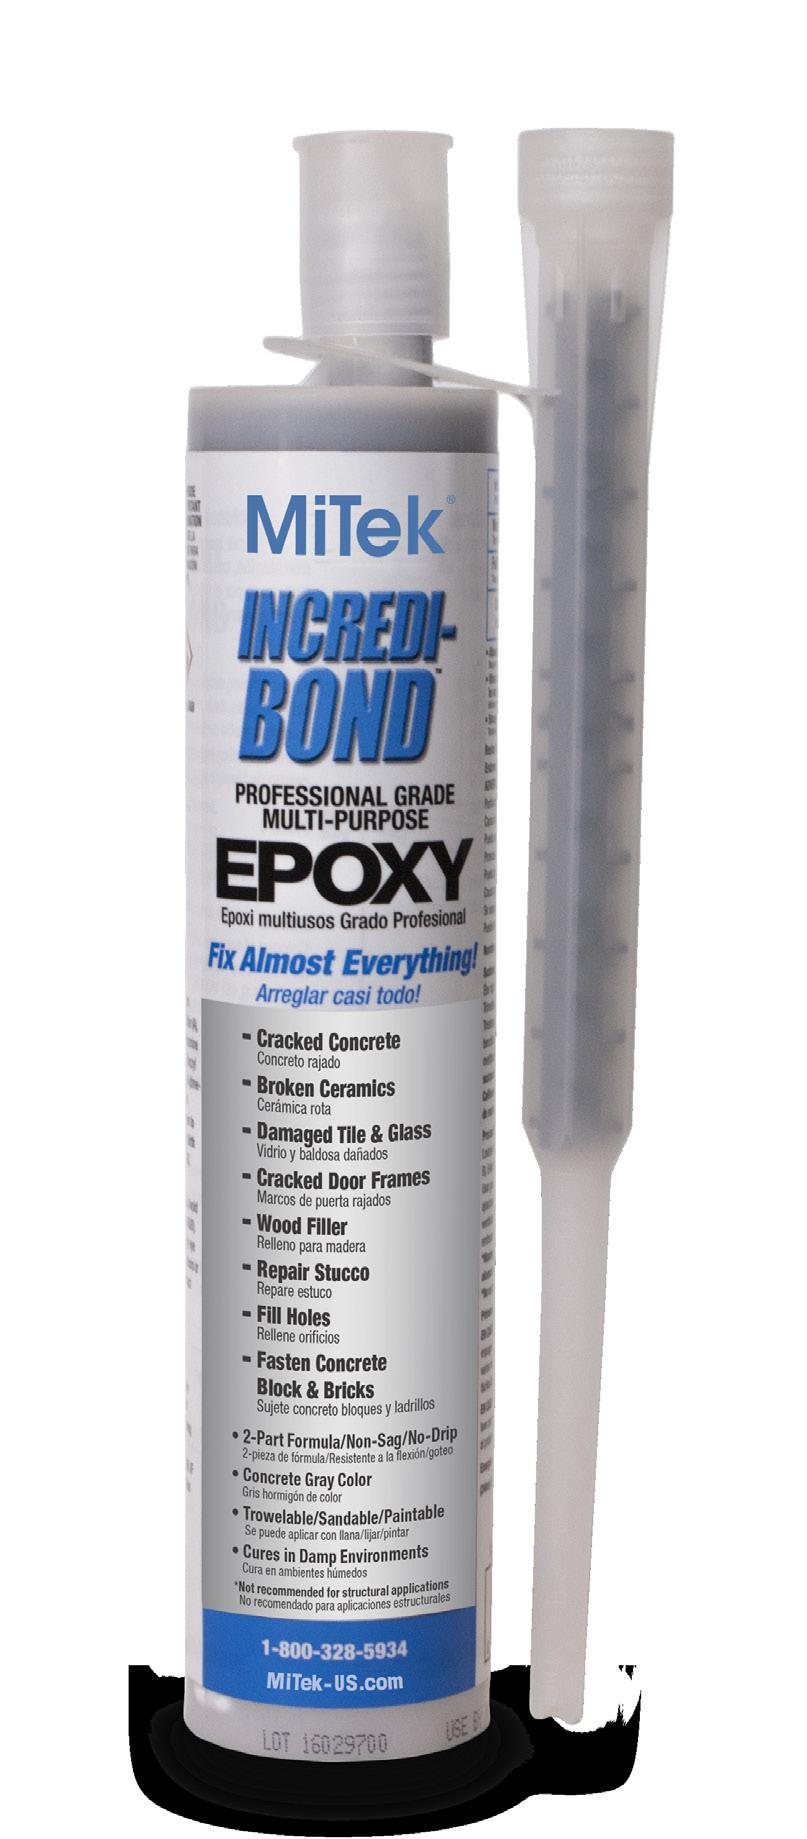 INCREDI-BOND BEST FOR MULTI-PURPOSE MAINTENANCE, REPAIR & OVERHAUL PROJECTS Multi-Purpose Bonding & Repair Epoxy Incredi-Bond is a high strength two- component epoxy specifically designed to be a